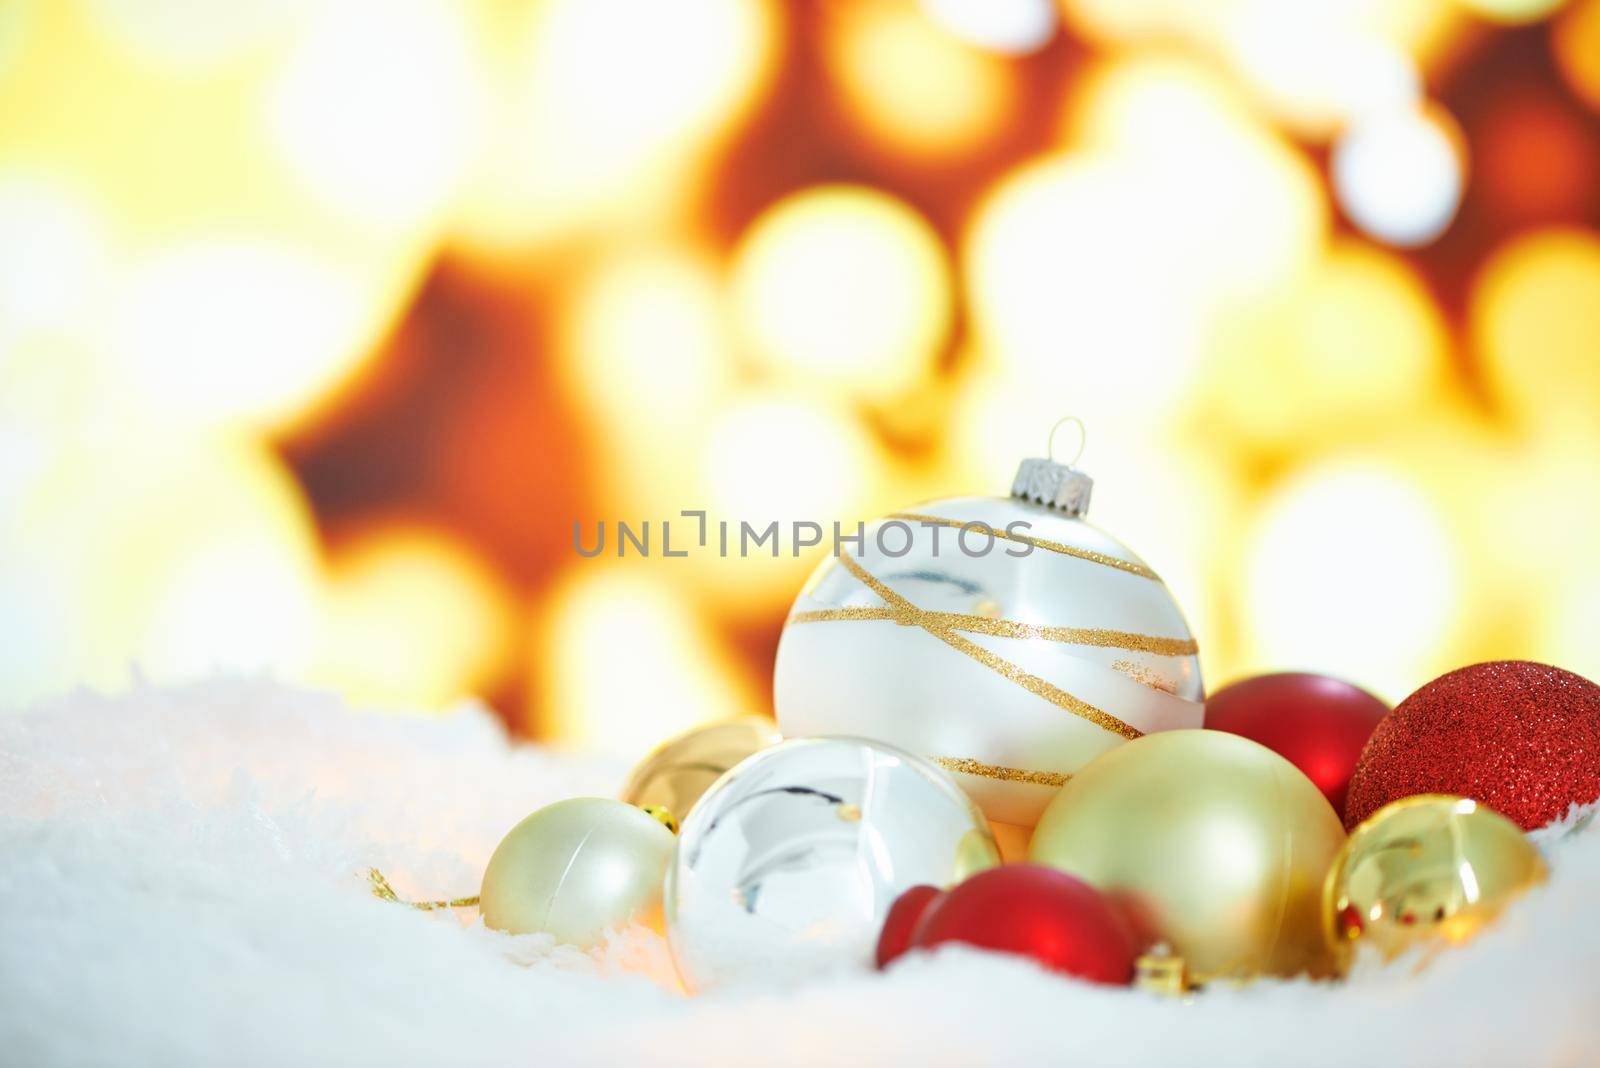 An arrangement of Christmas decorations against a background of lights.